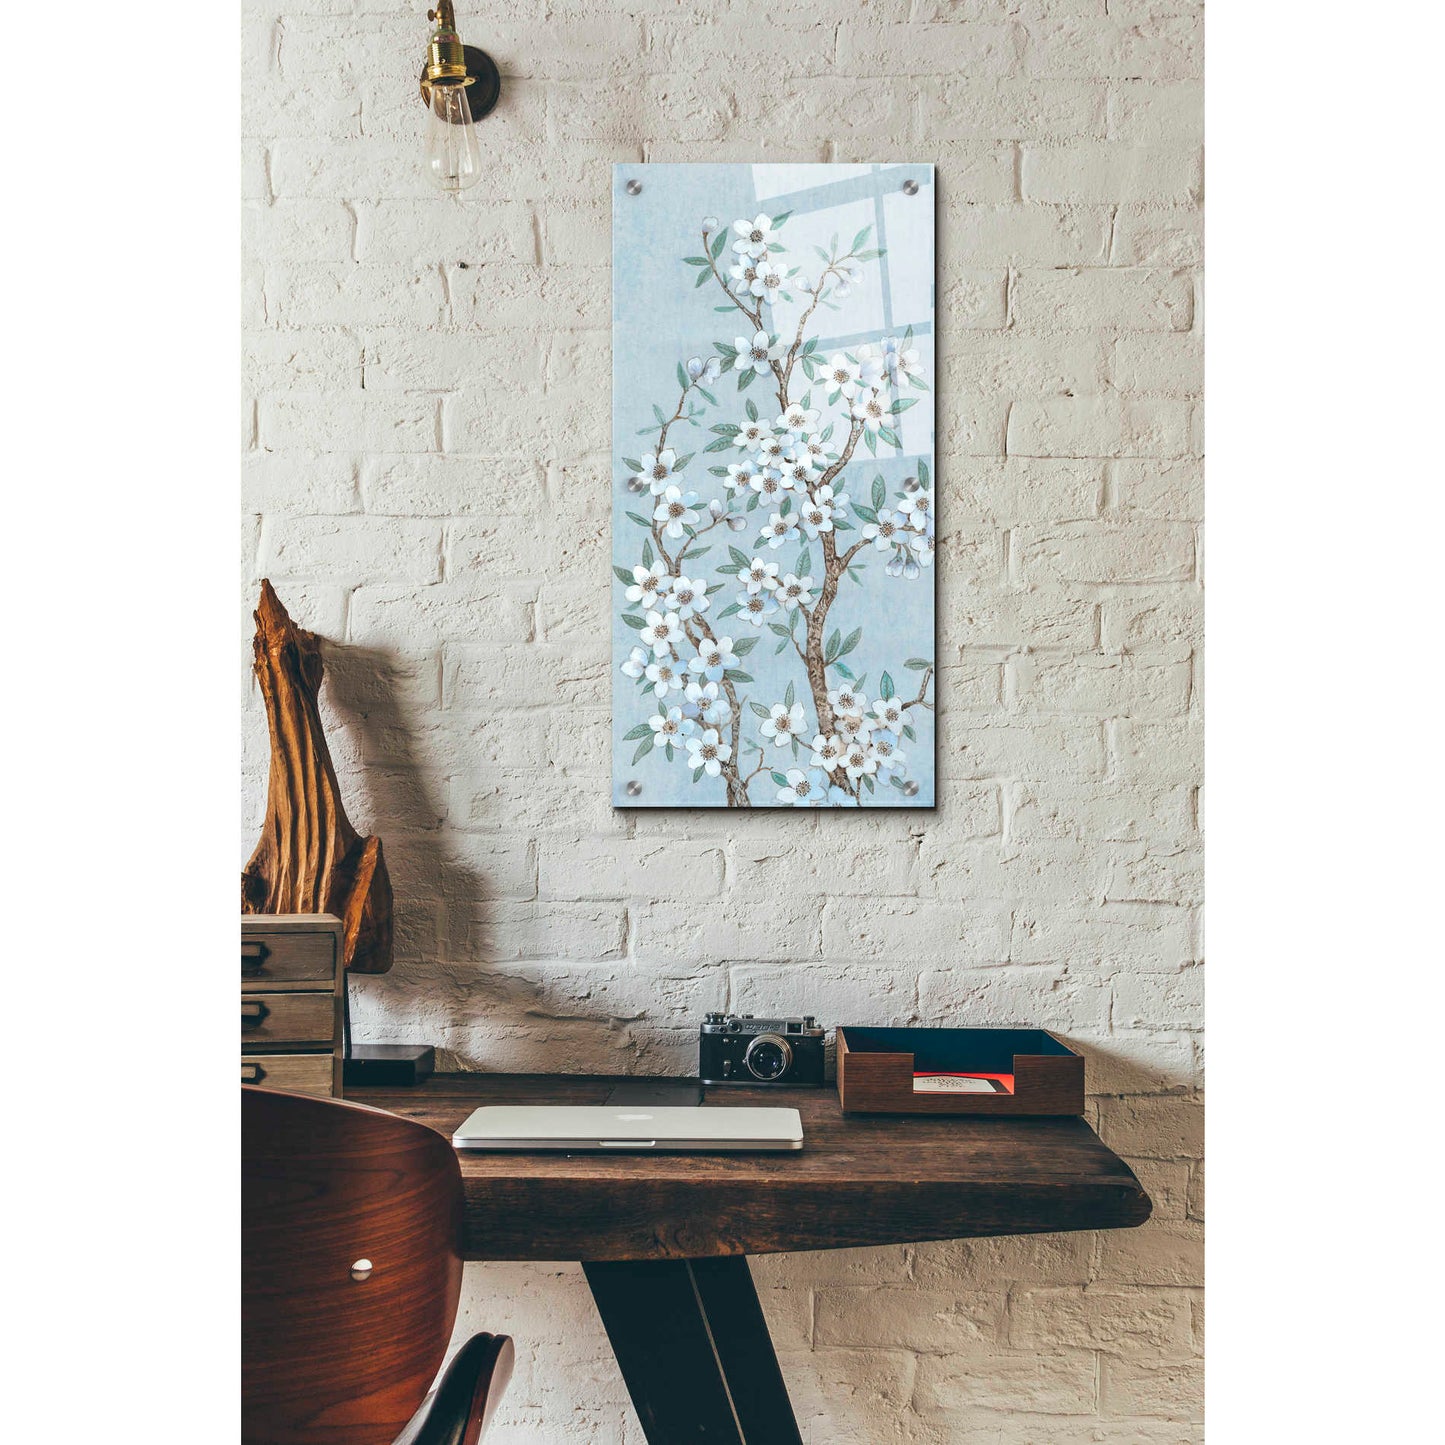 Epic Art 'Branches of Blossoms I' by Tim O'Toole, Acrylic Glass Wall Art,12x24